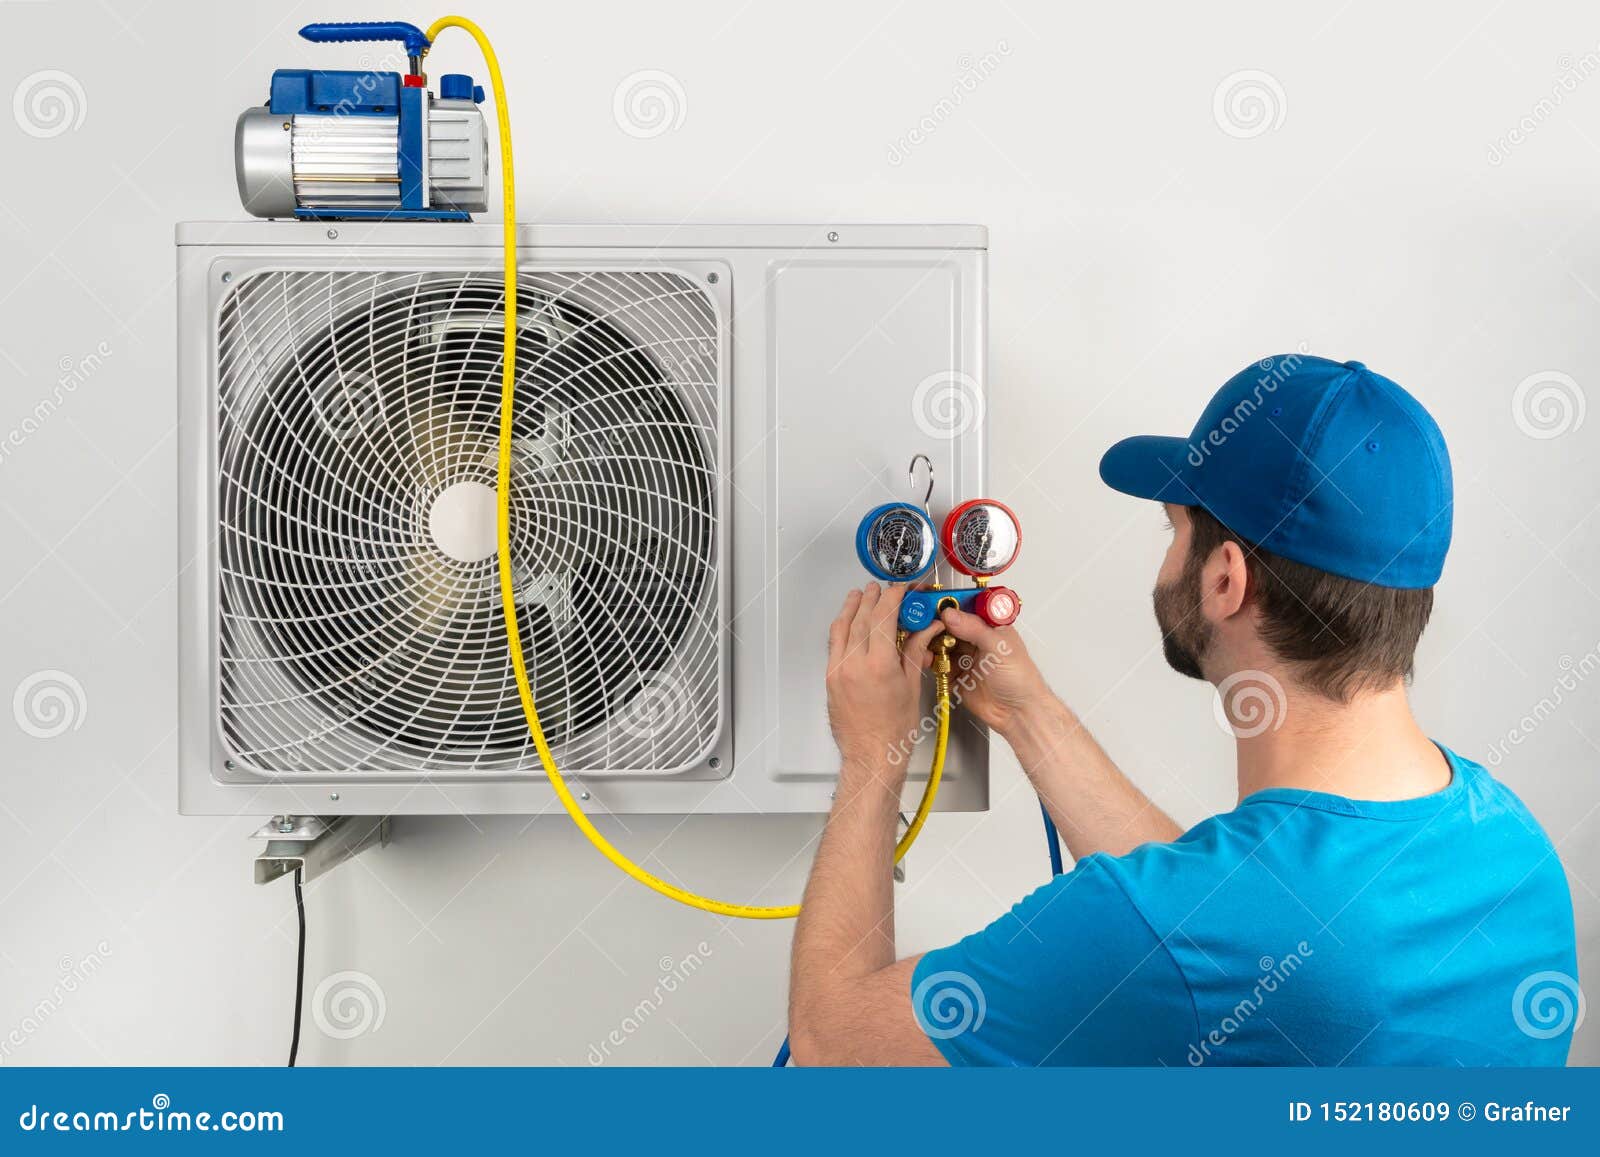 installation service fix  repair maintenance of an air conditioner outdoor unit, by cryogenist technican worker evacuate the